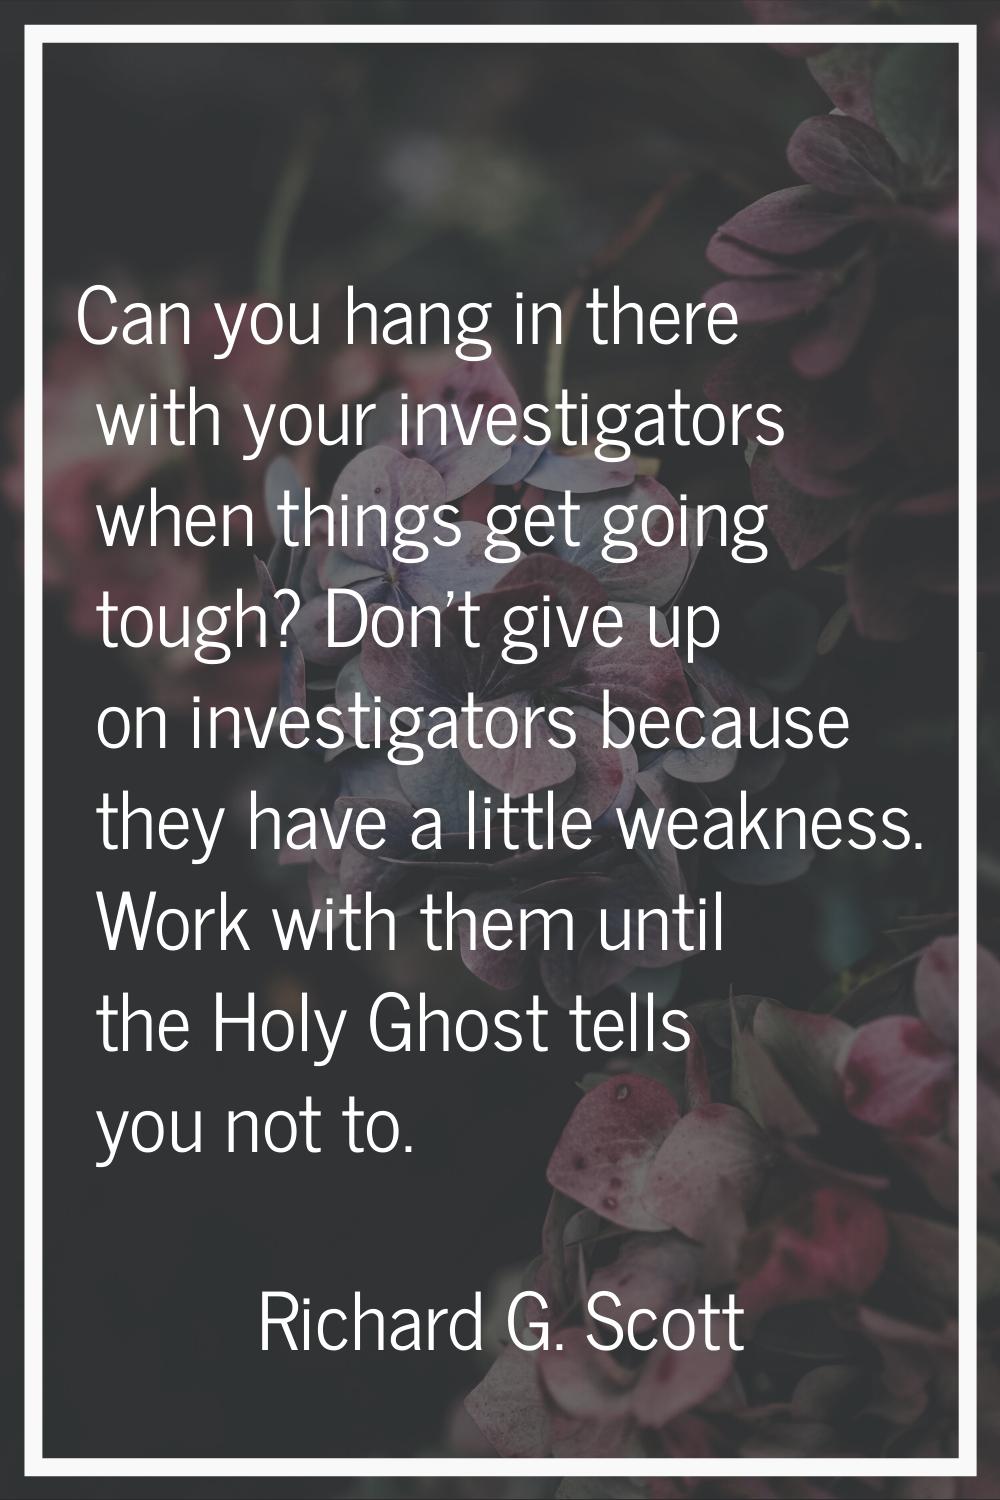 Can you hang in there with your investigators when things get going tough? Don't give up on investi